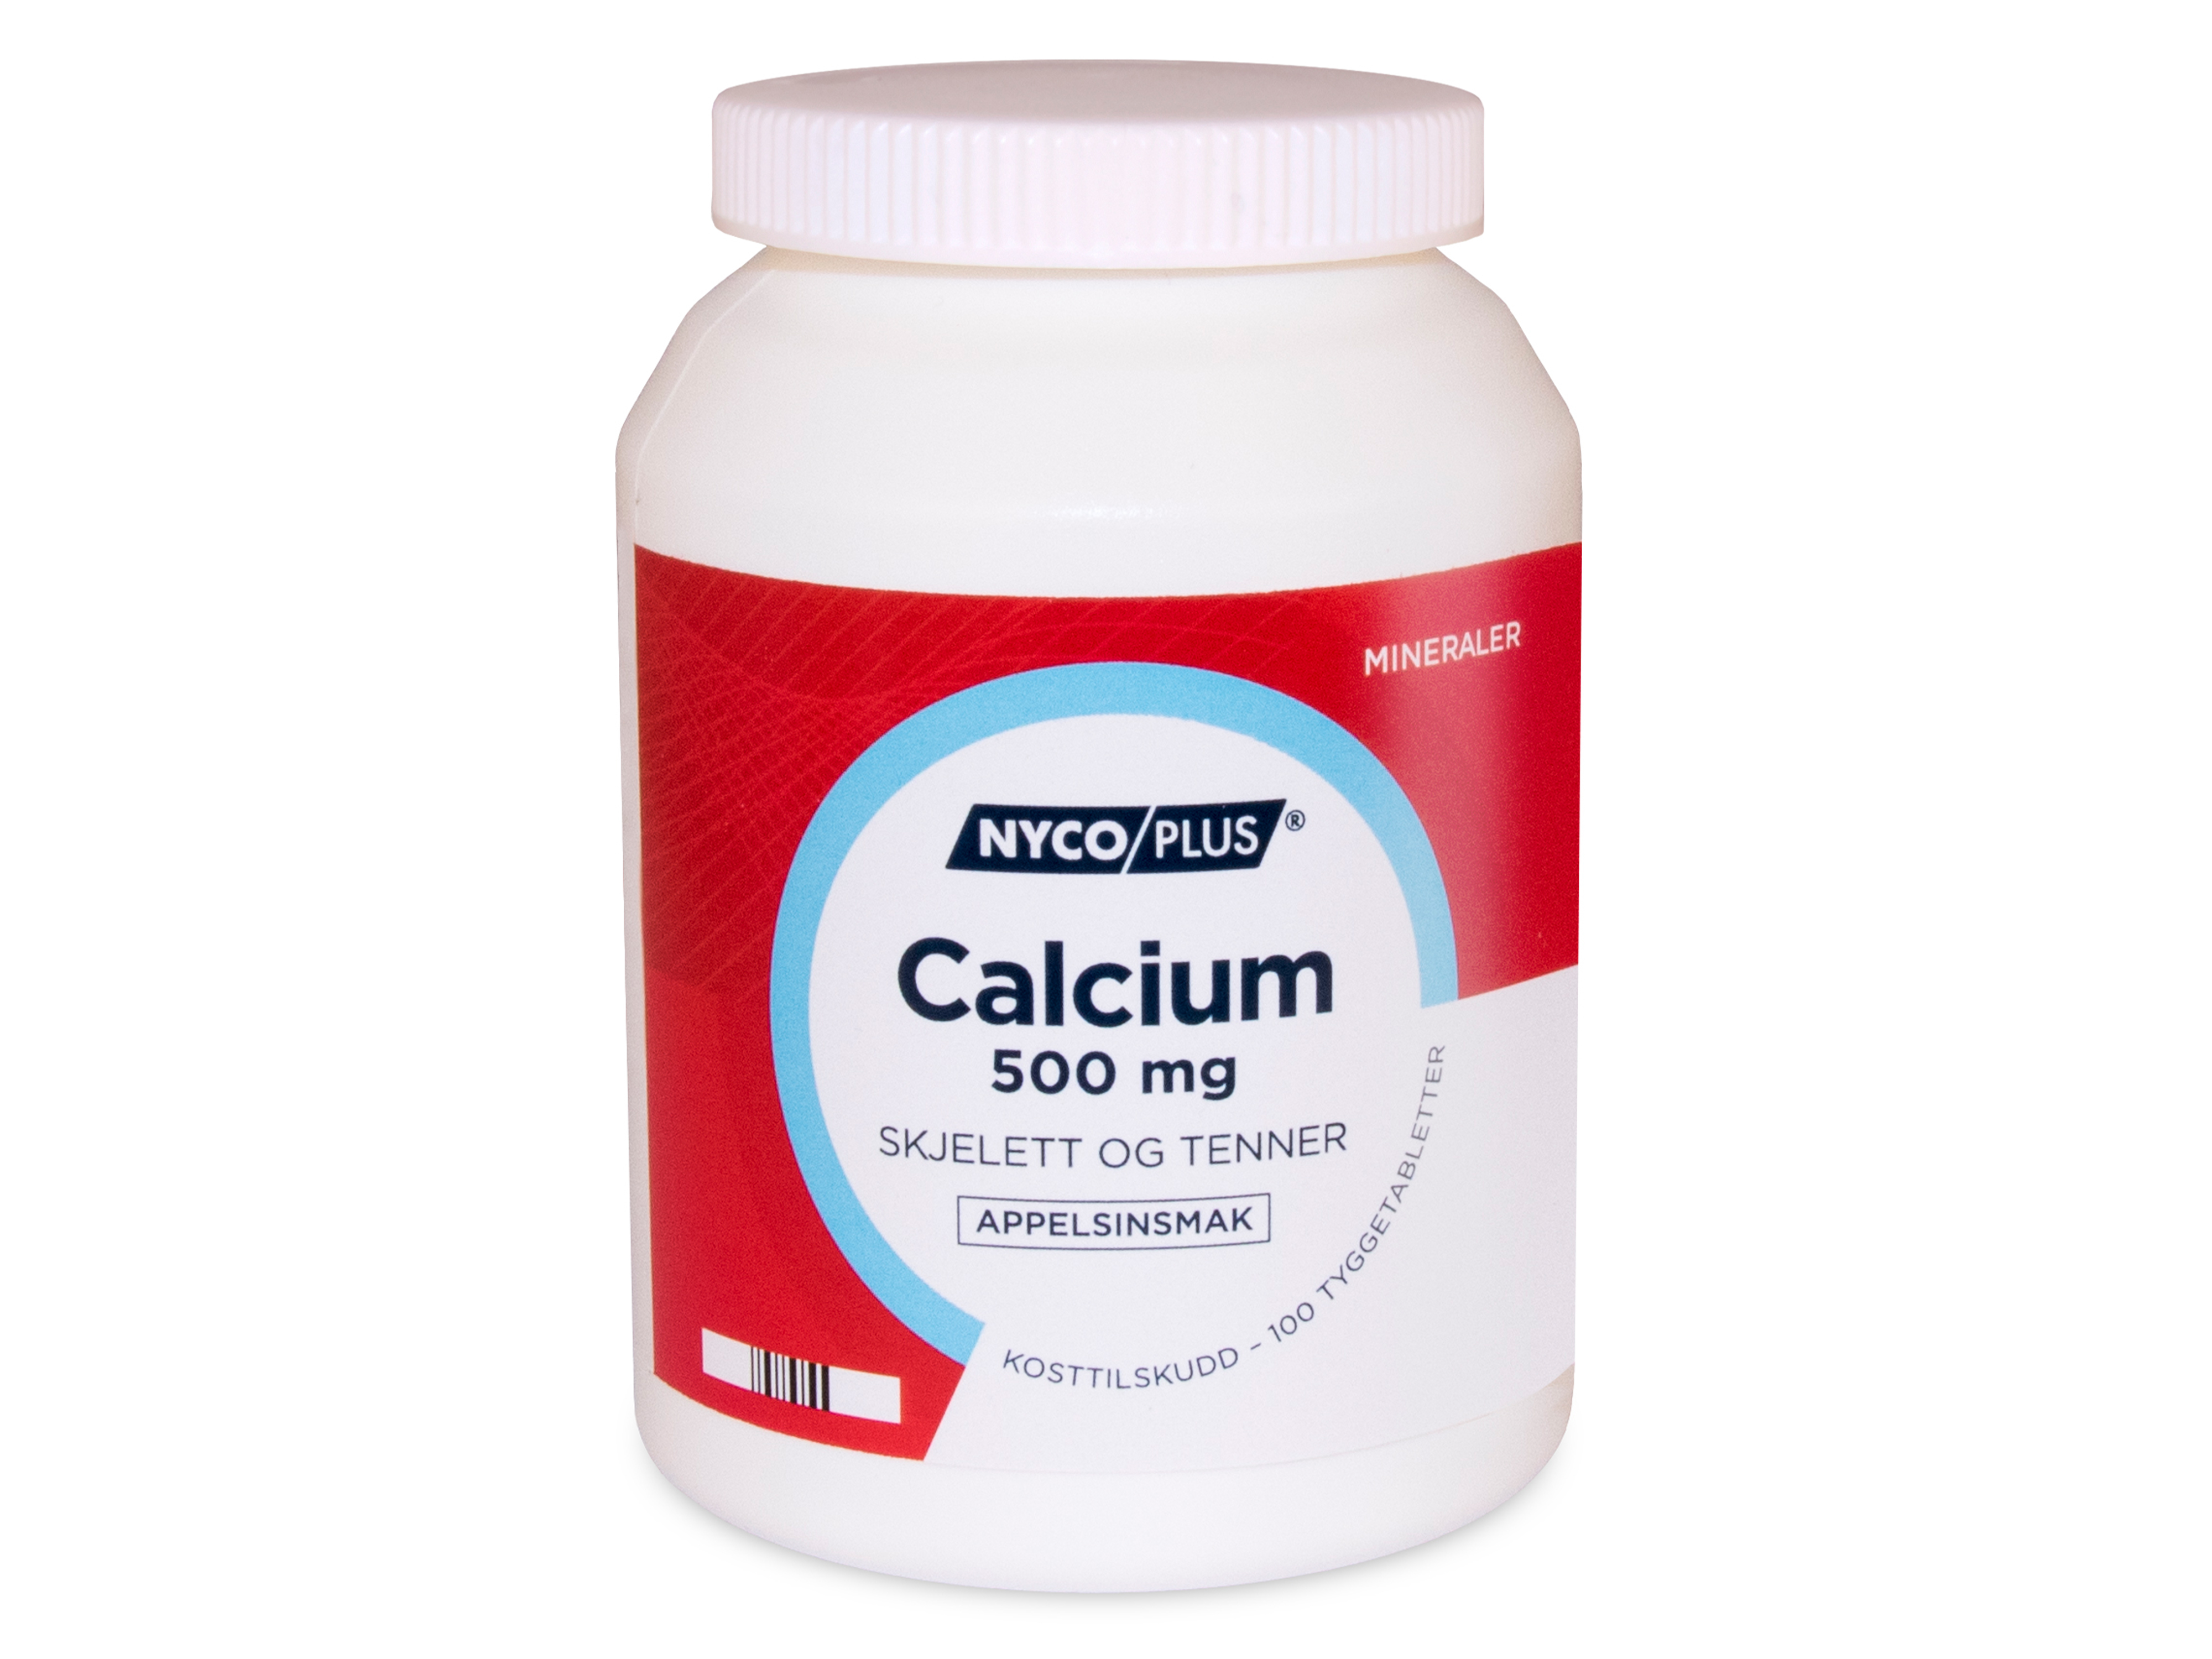 Nycoplus Calcium 500 mg, Appelsin, 100 tyggetabletter